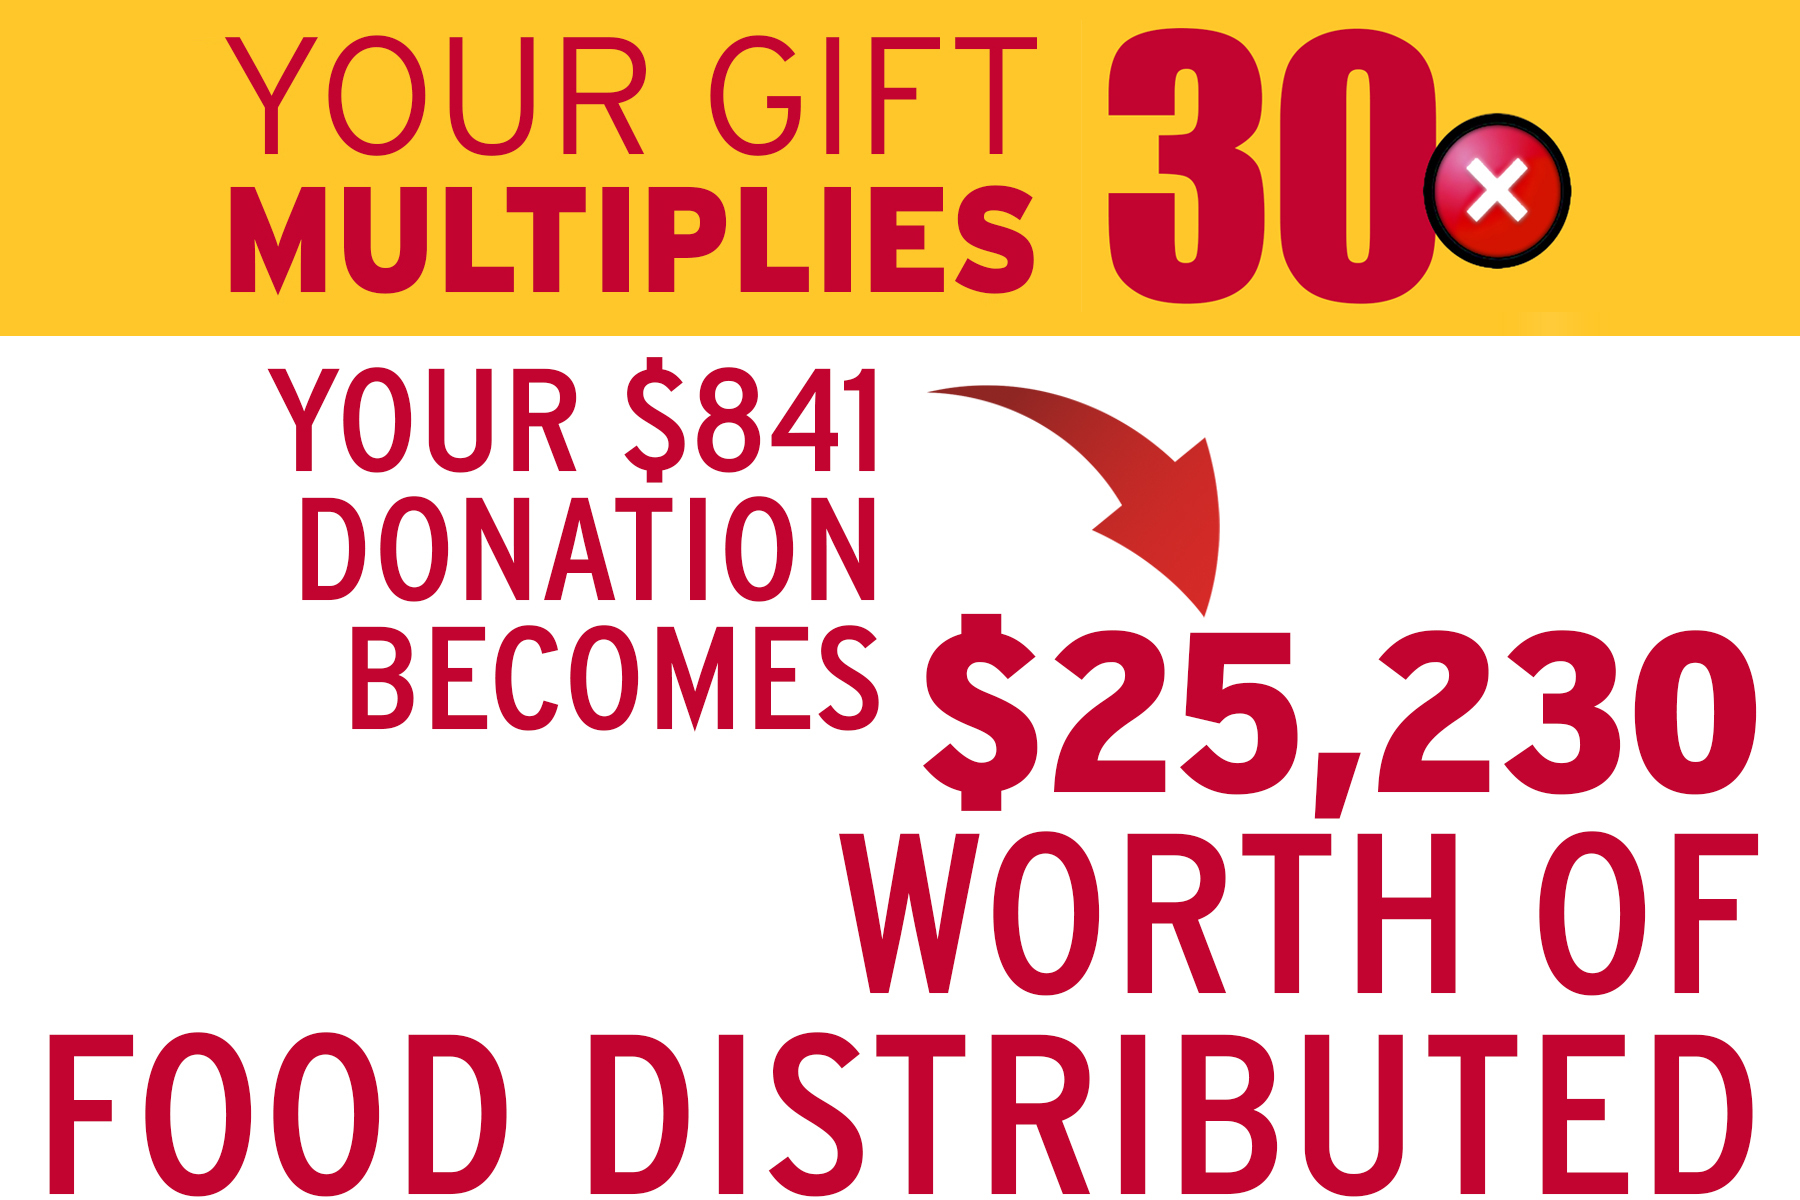 Your gift multiplies